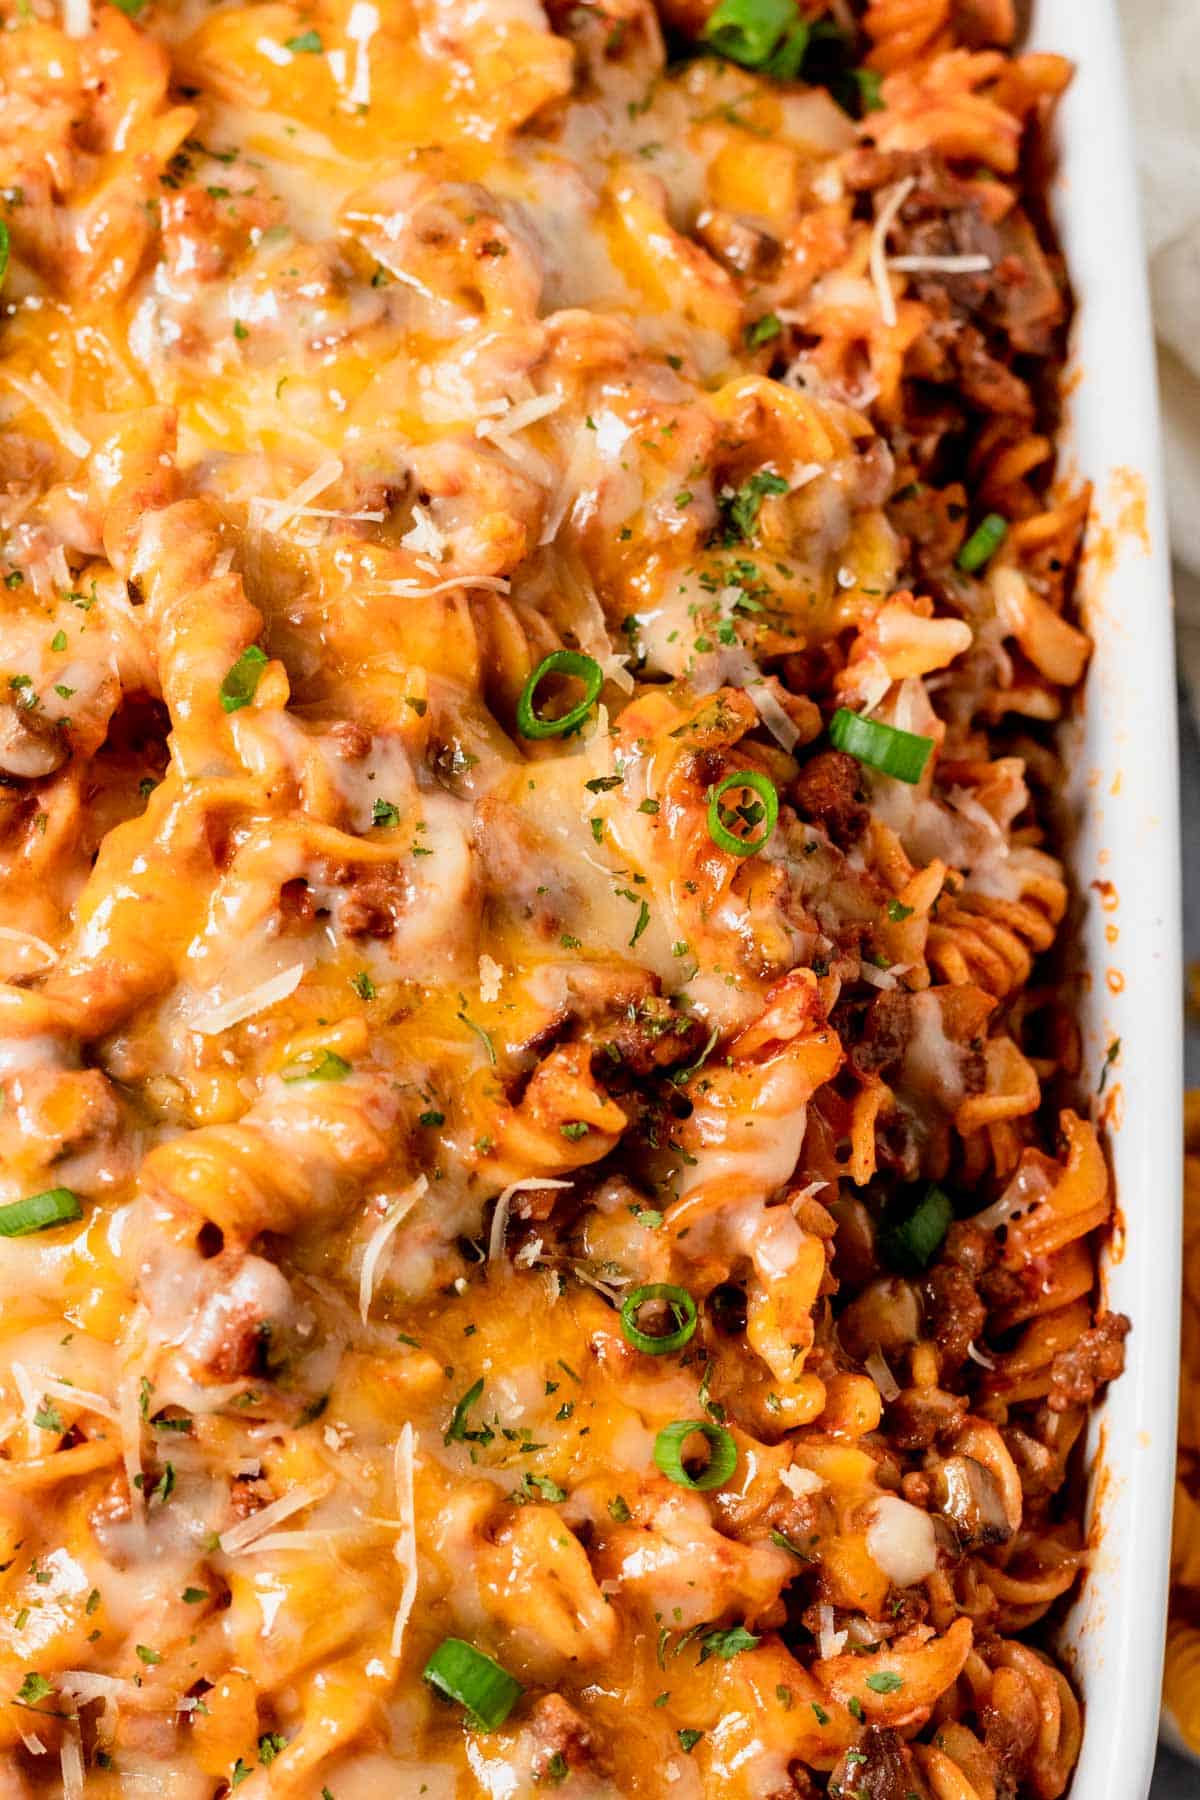 baked hamburger casserole with cheese